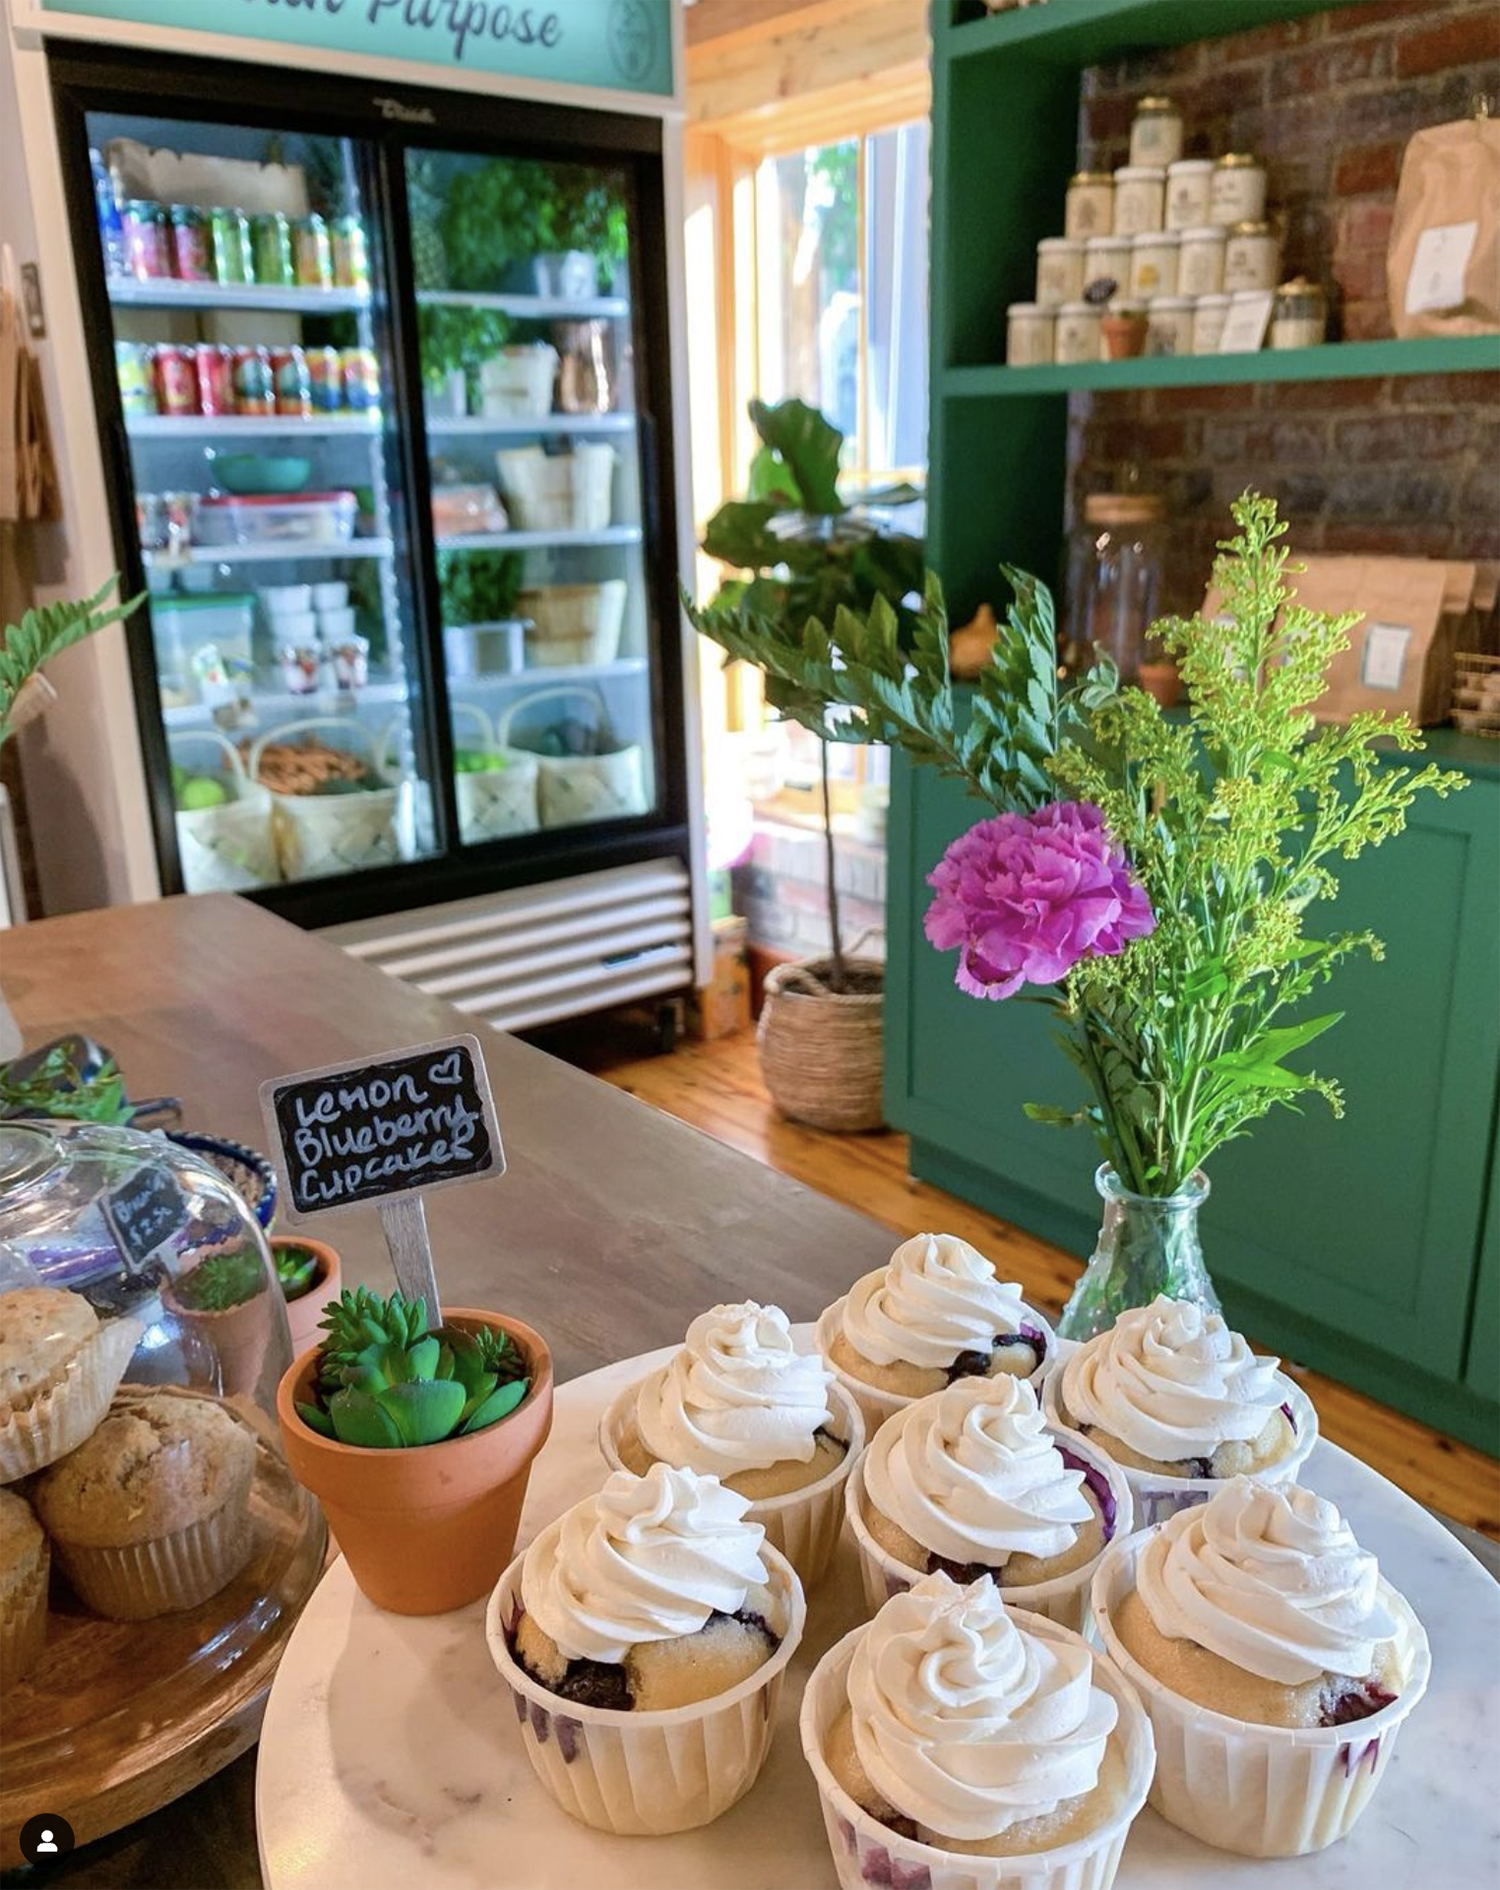 Lemon blueberry cupcakes from Rooted Cafe and Market in Pinehurst, North Carolina.